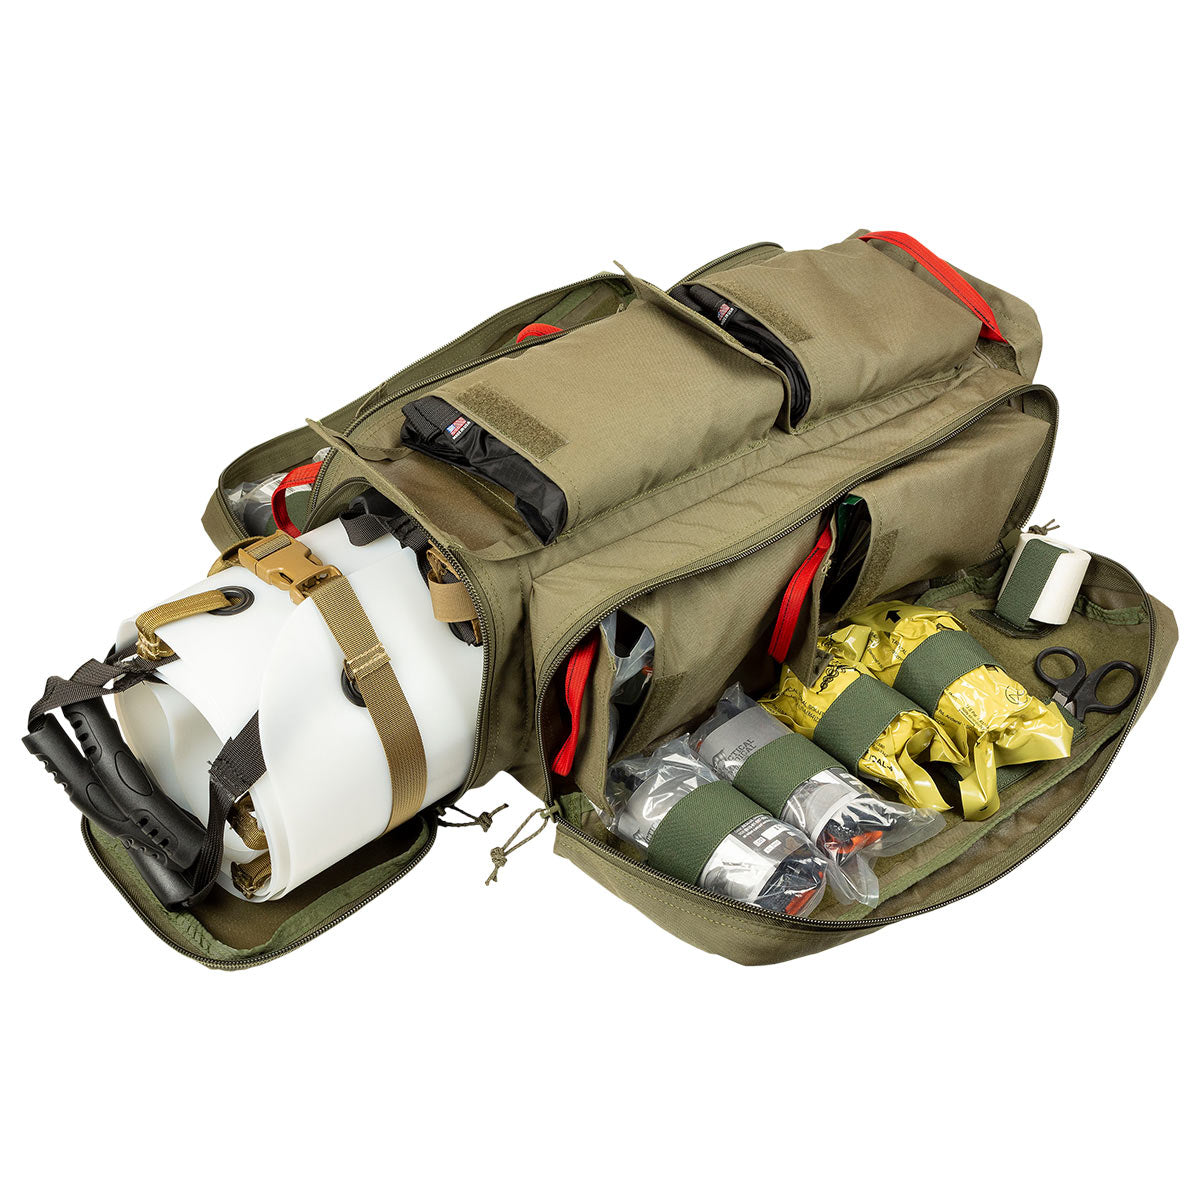 TacMed™ Warm Zone Kit with Foxtrot Litter